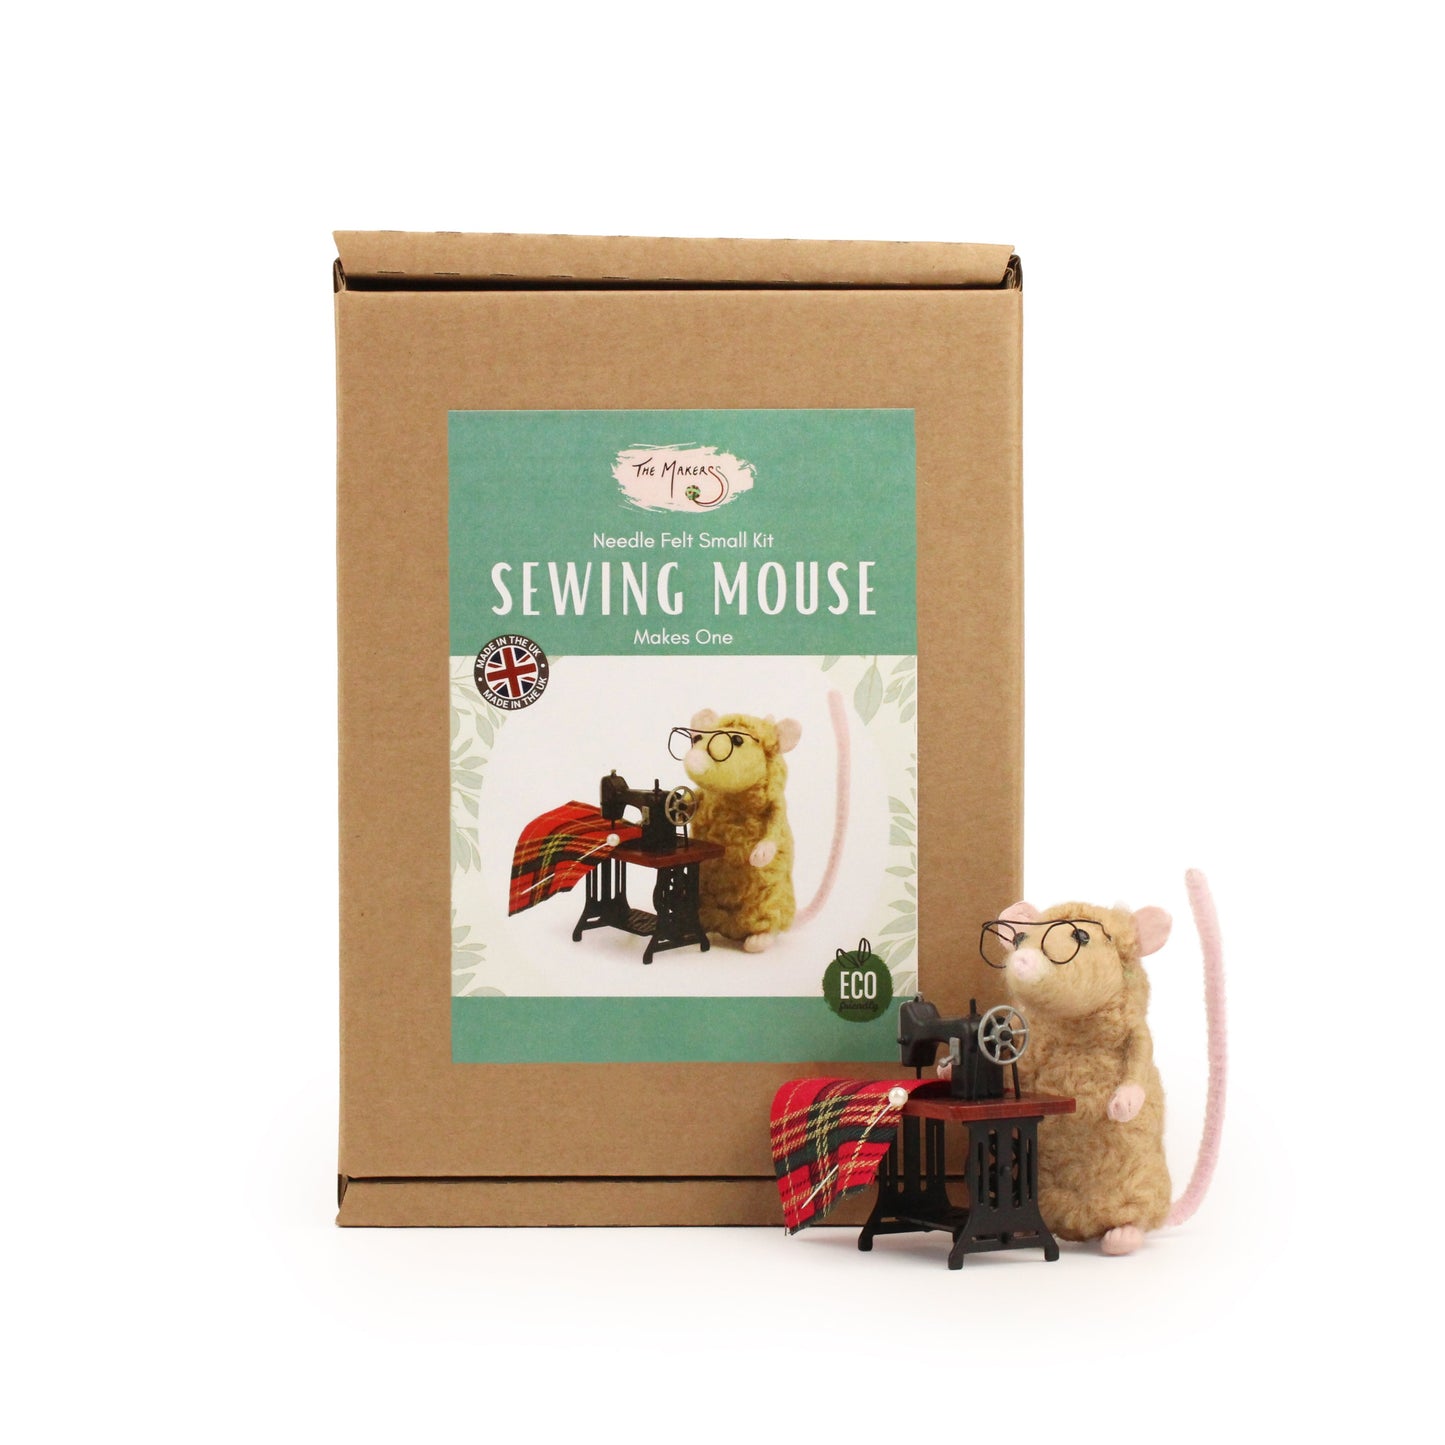 Sewing Mouse Small Needle Felt Kit - The Makerss